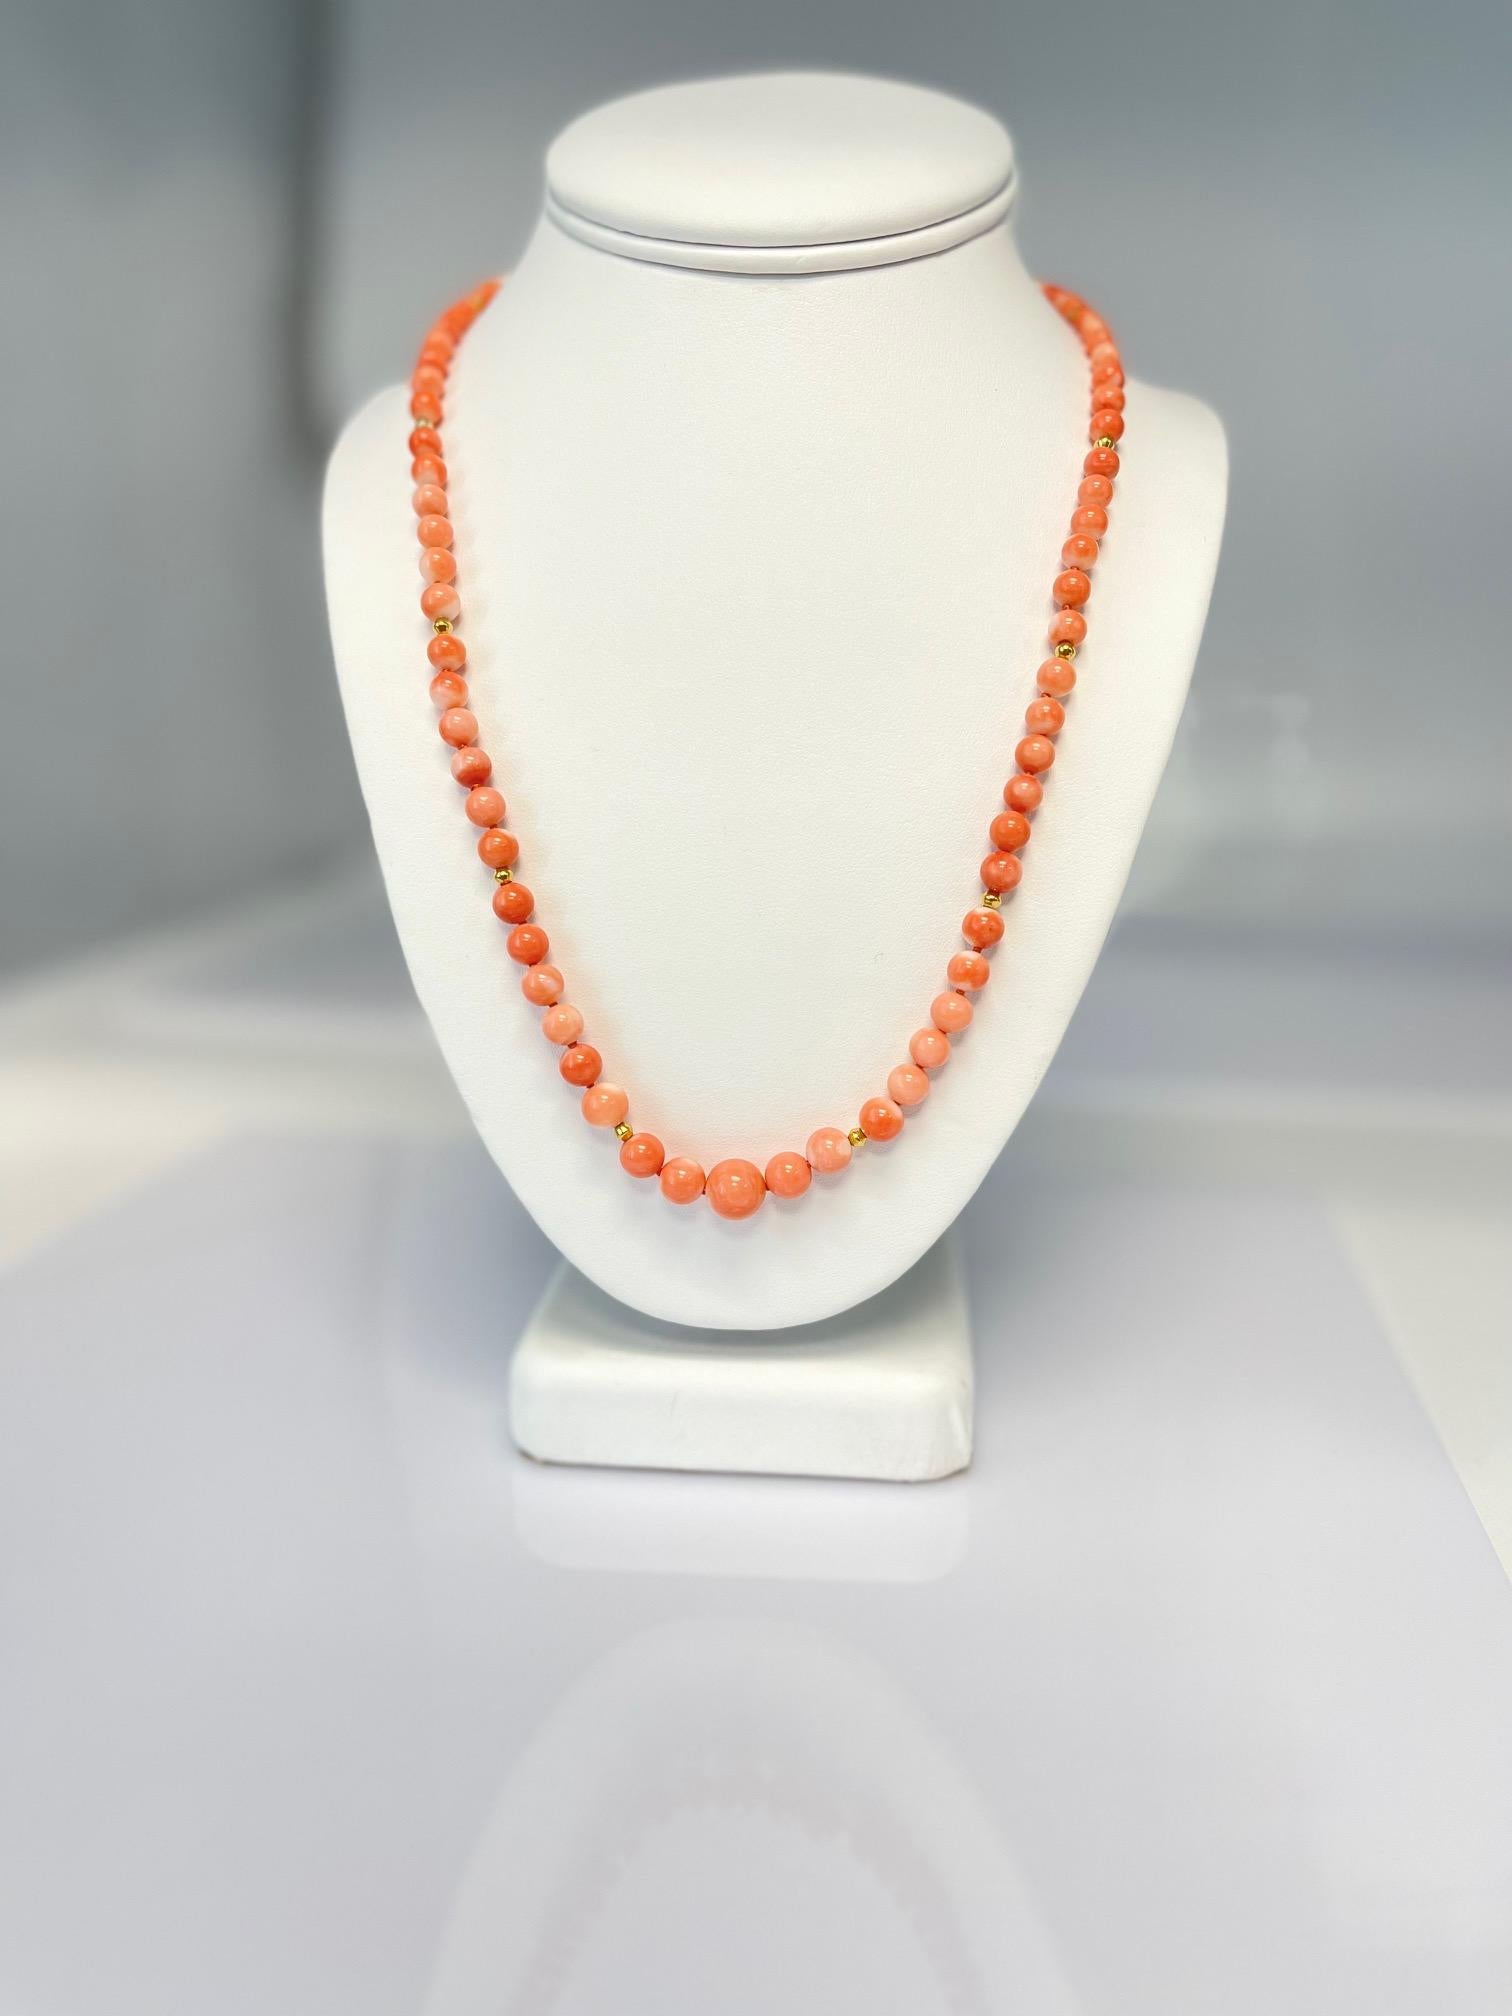 Women's or Men's Coral Beaded Necklace, 5.00 - 10.00mm Graduated with Yellow Gold Accents